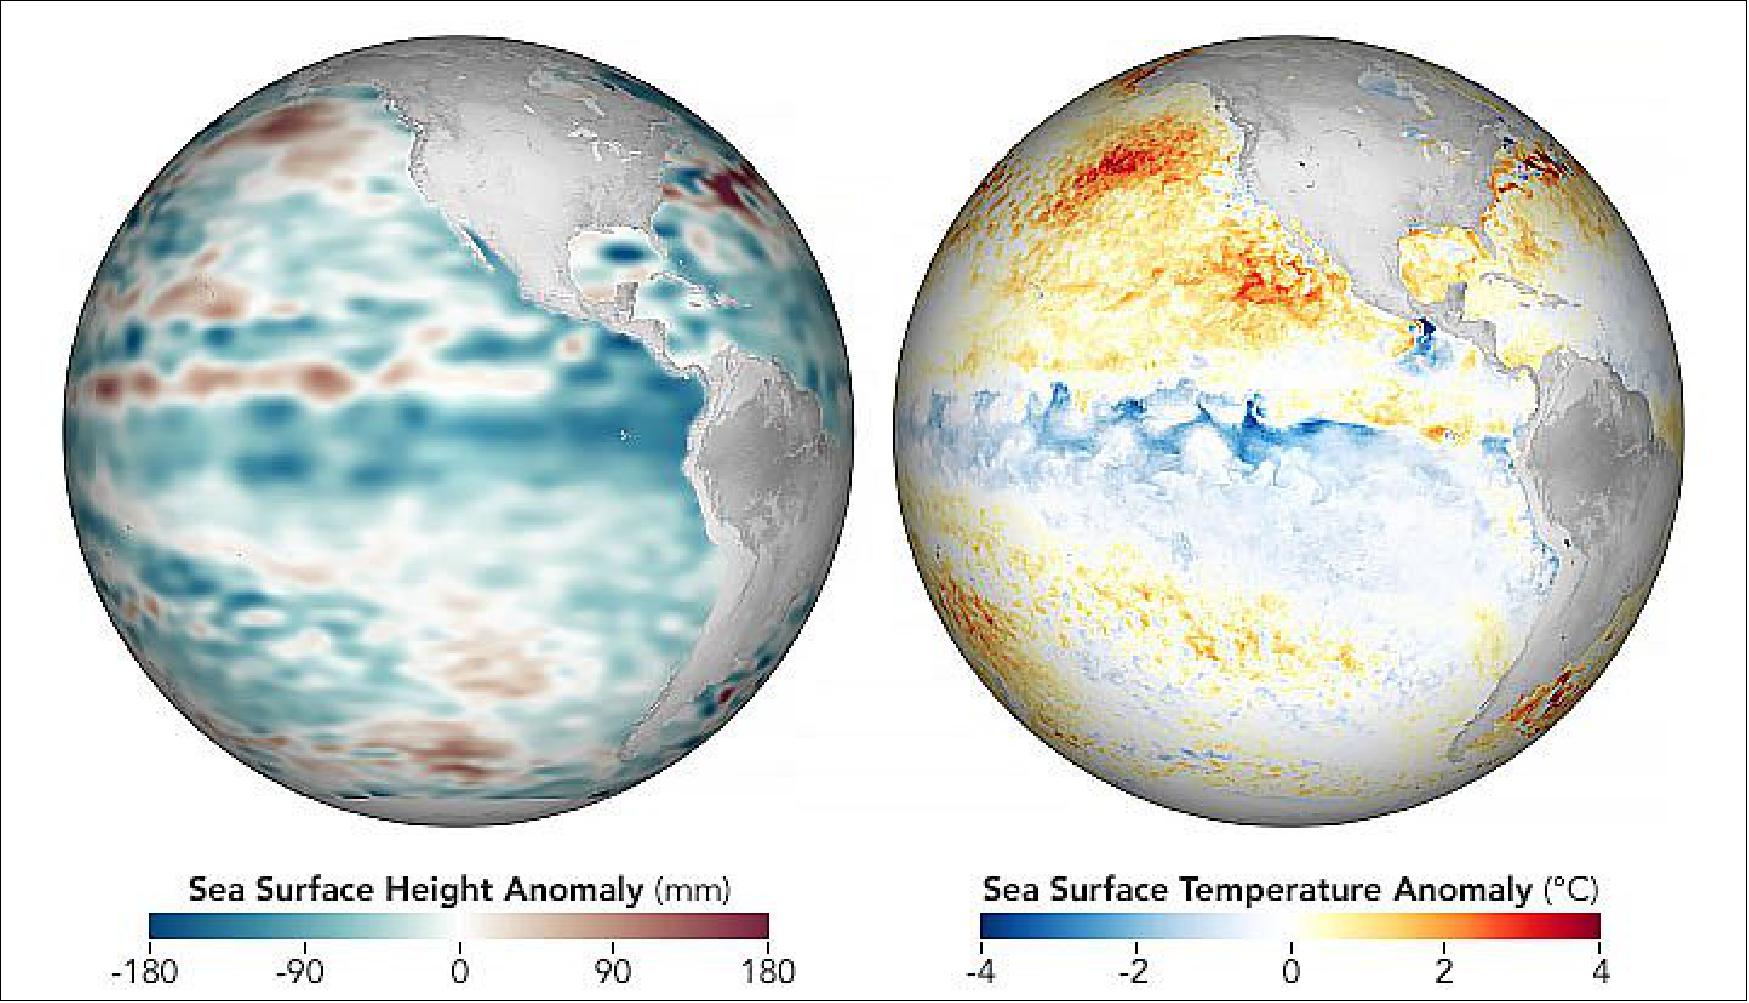 Figure 7: The current La Niña event fits into a larger climate pattern that has been going on for nearly two decades. The maps show conditions across the central and eastern Pacific Ocean as observed on November 25, 2020, and analyzed by JPL scientists. The globe on the left depicts sea surface height anomalies measured by the Jason-3 satellite. Shades of blue indicate sea levels that were lower than average; normal sea-level conditions appear white; and reds indicate areas where the ocean stood higher than normal. The expansion and contraction of the surface is a good proxy for ocean temperatures because warmer water expands to fill more volume, while cooler water contracts. The second globe shows sea surface temperature (SST) data from the Multiscale Ultrahigh Resolution Sea Surface Temperature (MUR SST) project. MUR SST blends measurements of sea surface temperatures from multiple NASA, NOAA, and international satellites, as well as ship and buoy observations. (Scientists also use instruments floating within the sea to project underwater temperatures.) [image credit: NASA Earth Observatory image by Joshua Stevens, using data from the Multiscale Ultrahigh Resolution (MUR) project and sea surface height analyses courtesy of Akiko Hayashi/NASA/JPL-Caltech. Story by Michael Carlowicz]